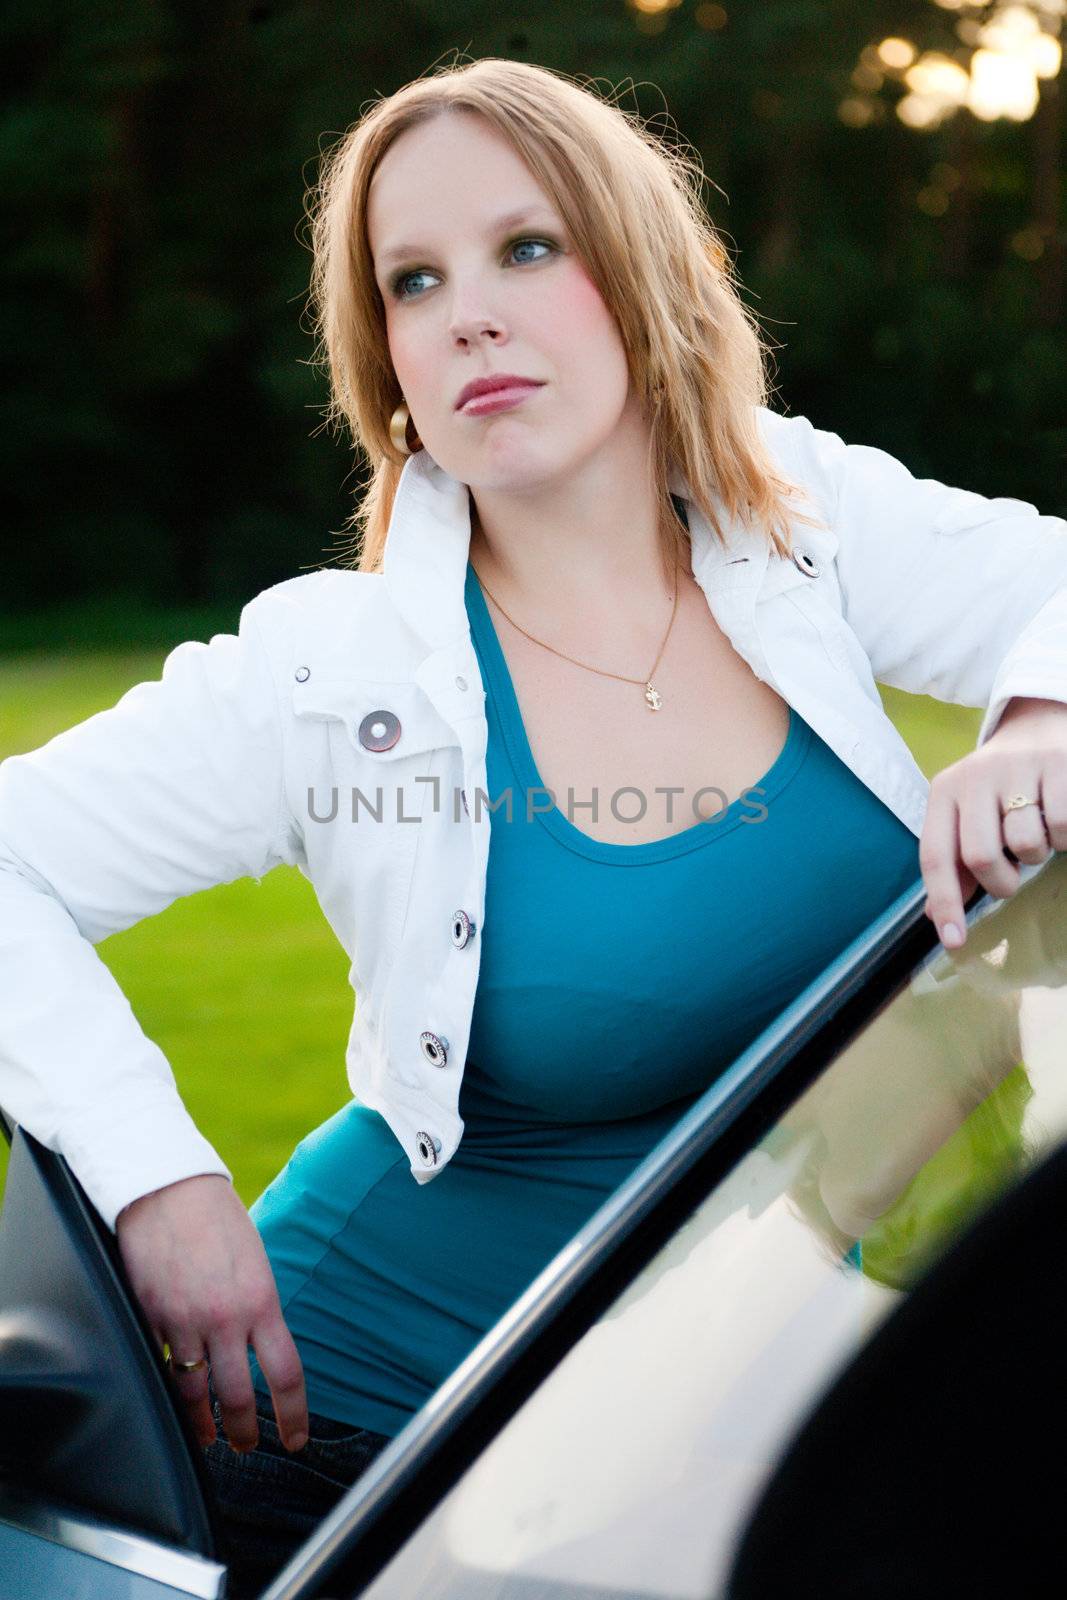 Posing with a car by DNFStyle